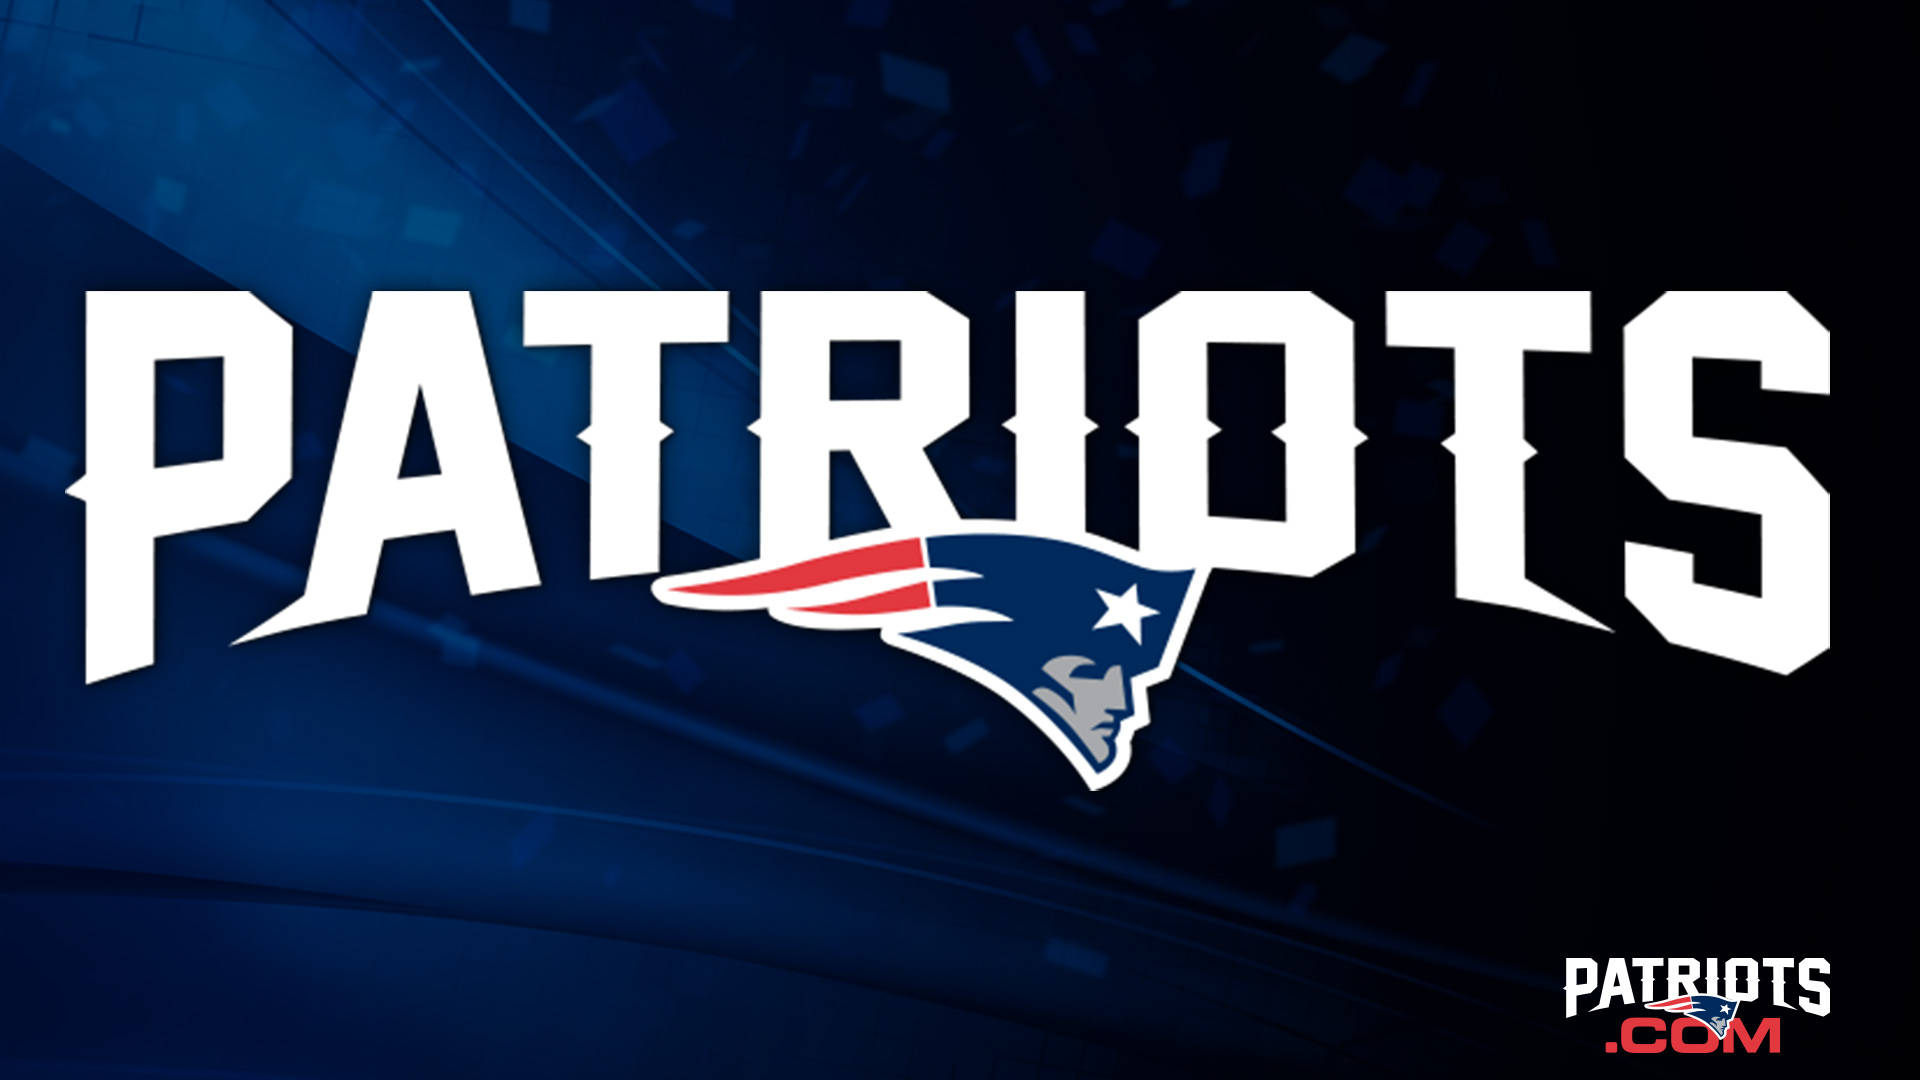 New England Patriots Logo On A Blue Background Wallpaper